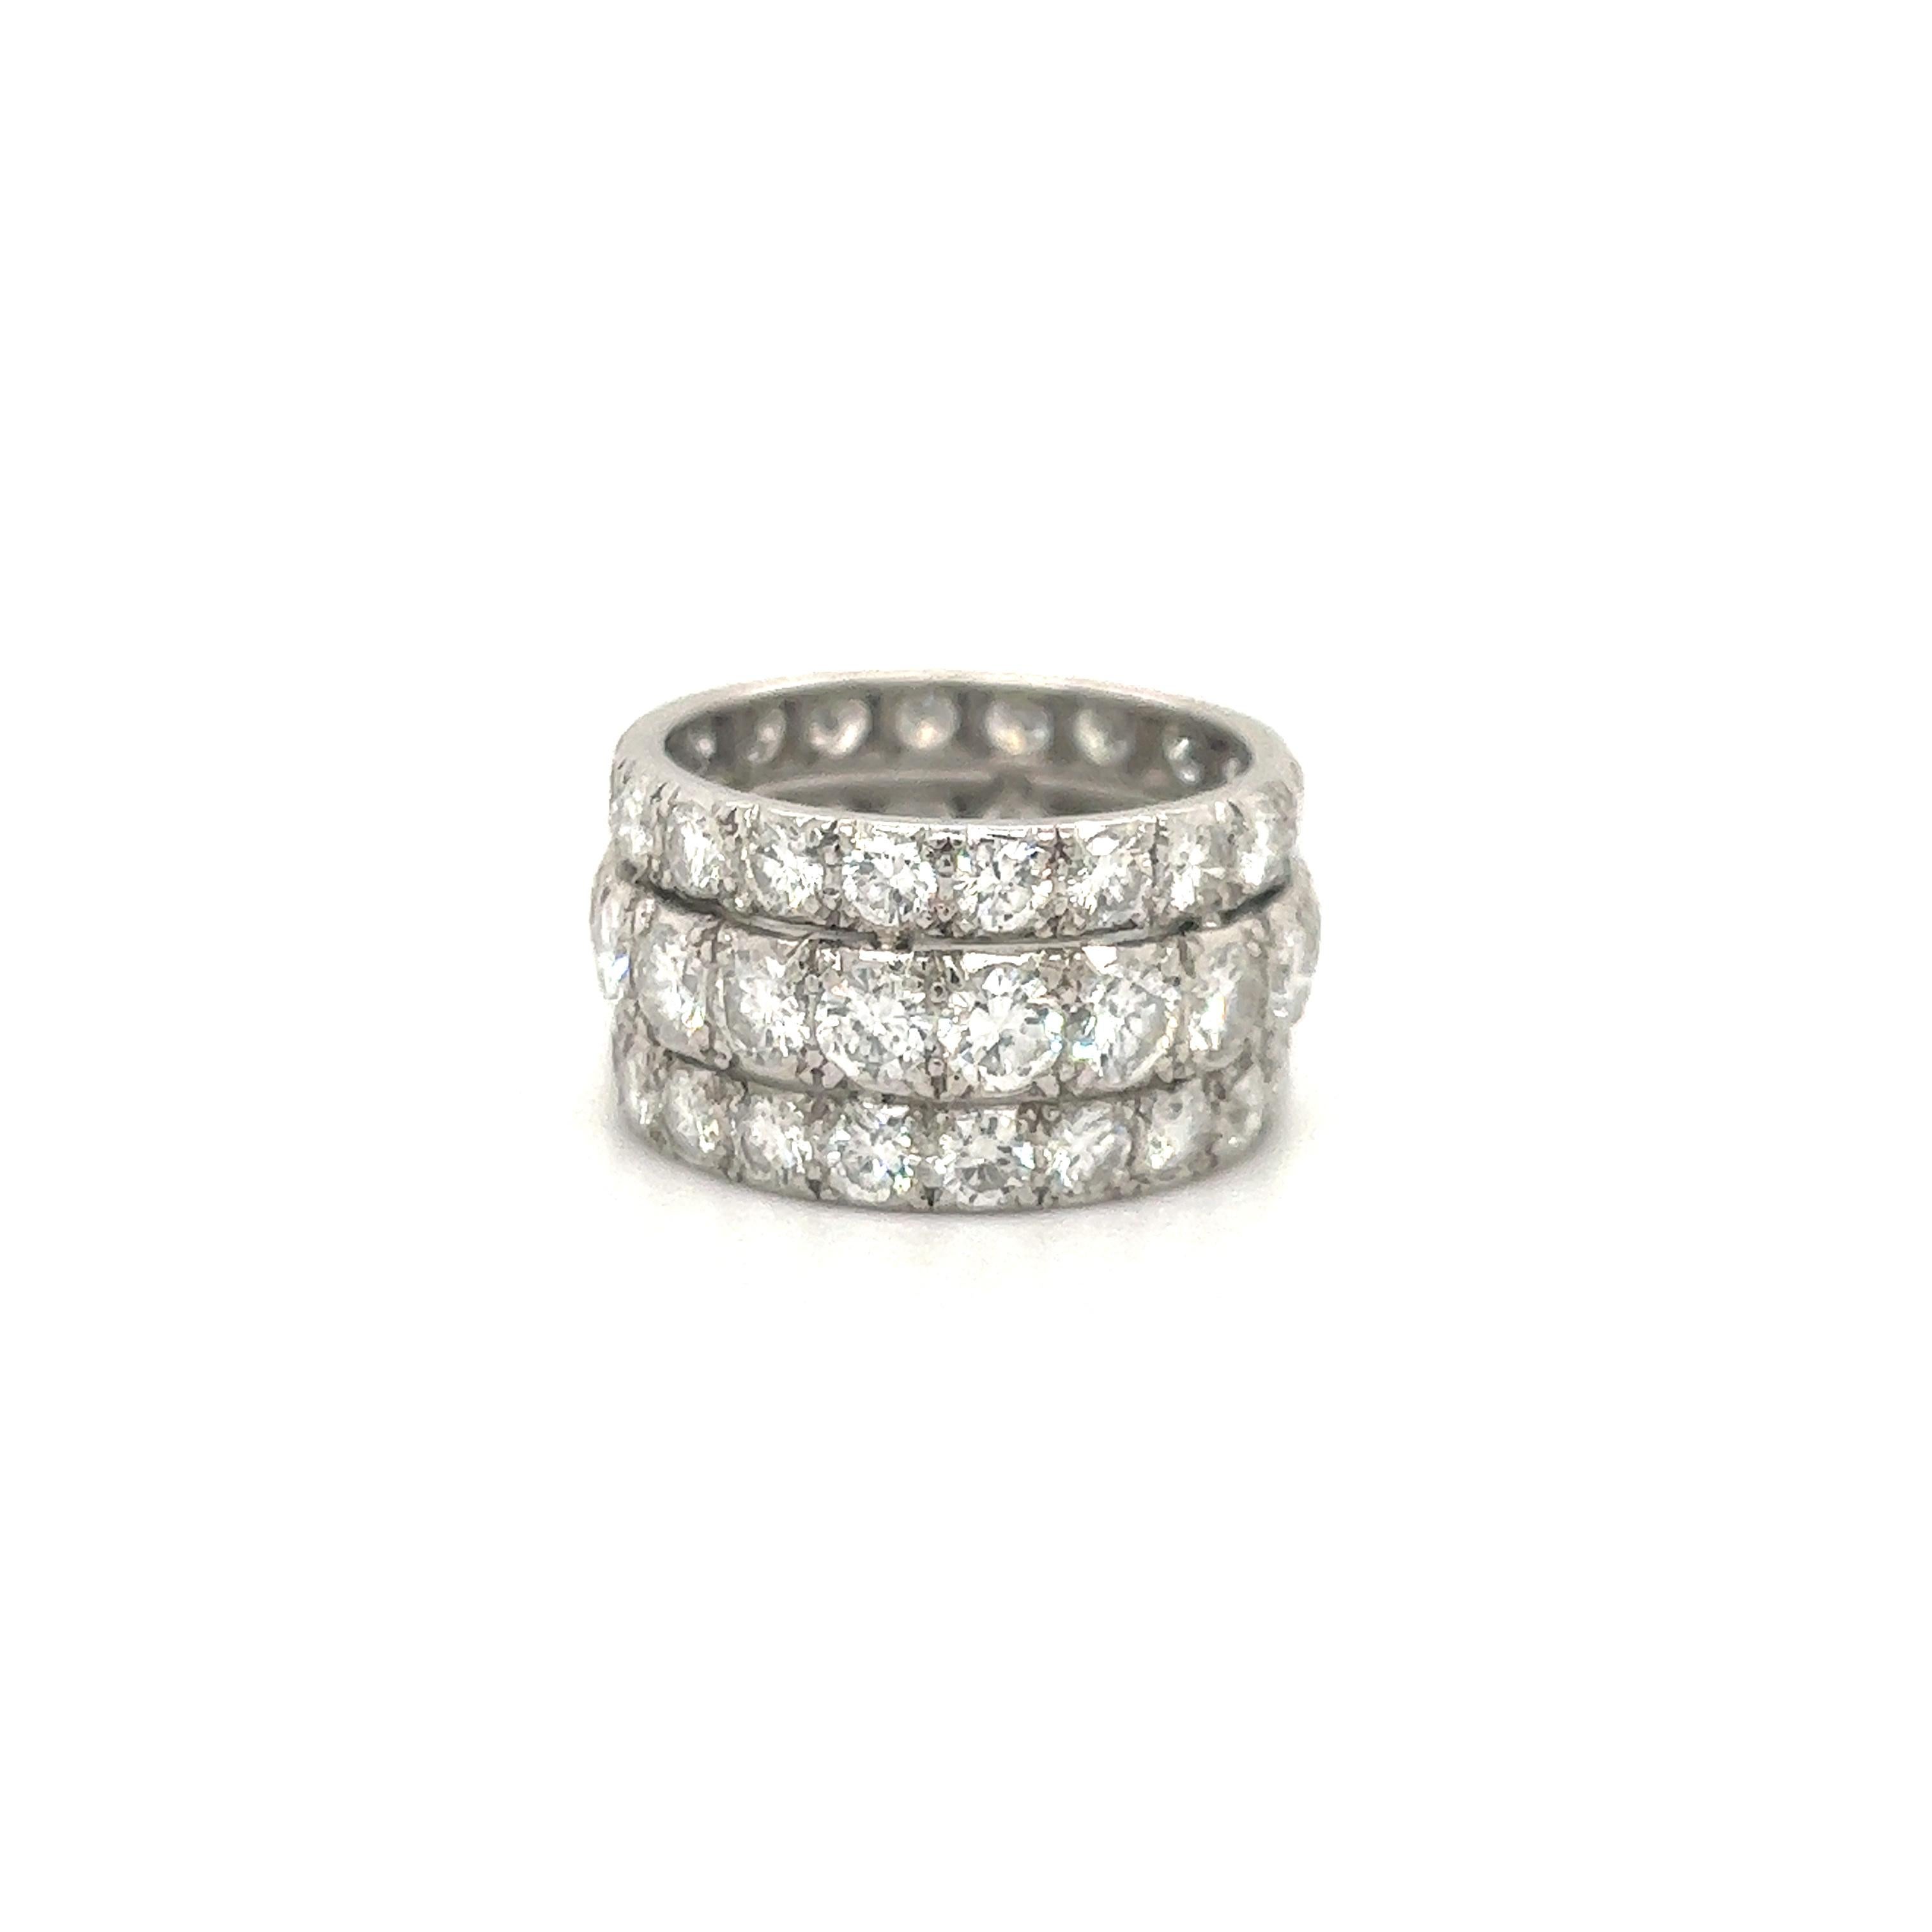 Fantastic design on this wide band estate beauty! This elegant ring is crafted in platinum and set with approximately 6.40 ct. of round brilliant cut earth mined diamonds. The diamonds in the ring are set with an illusion feel as the larger almost